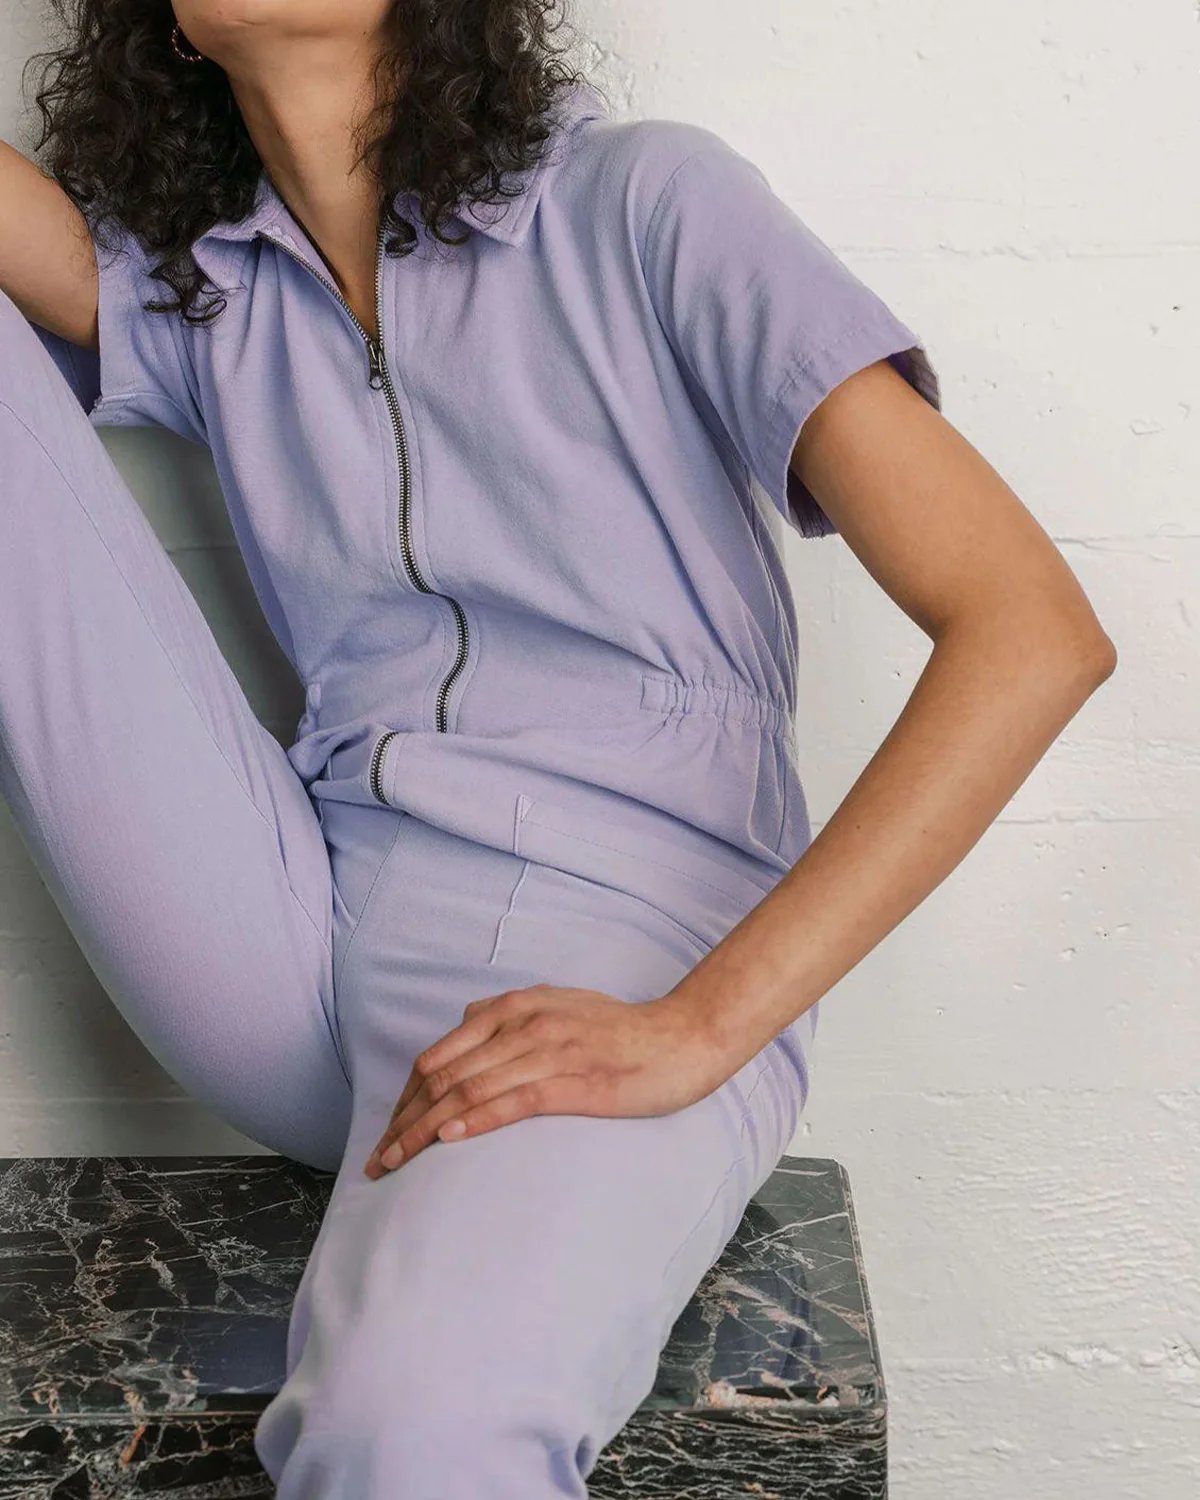 🎁Cropped Utility Jumpsuit - Buy two and get free shipping! mysite